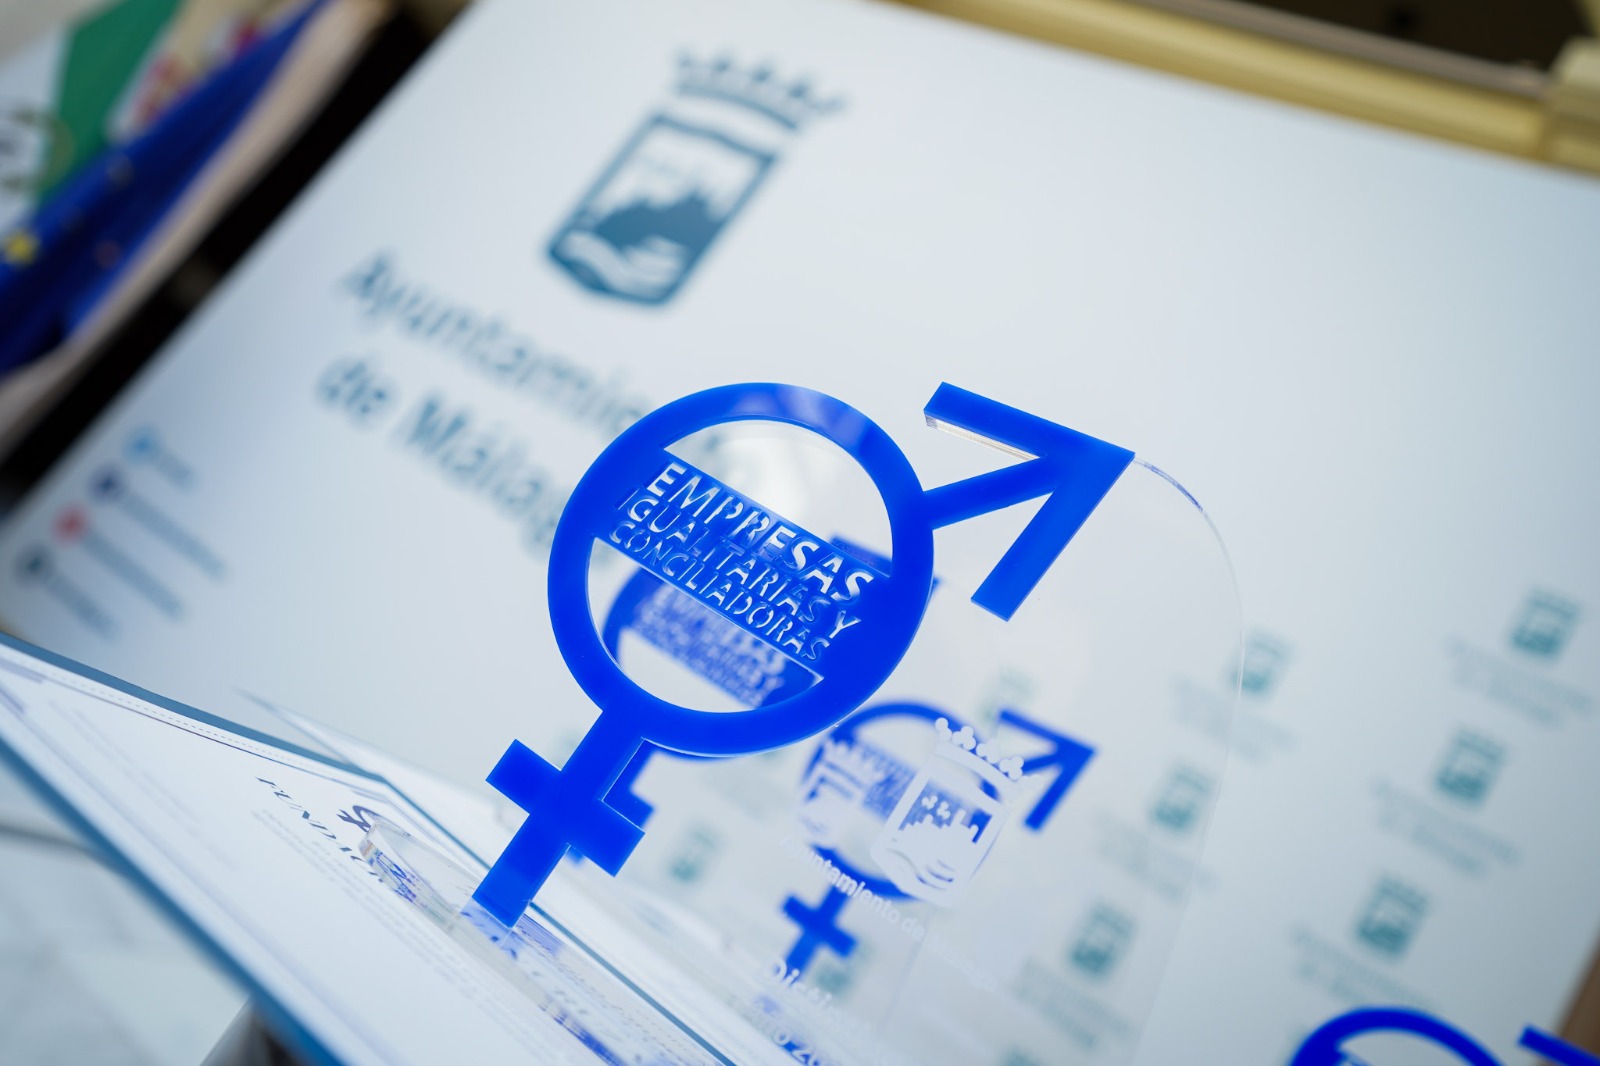 The City Council will distinguish companies that promote equality between men and women